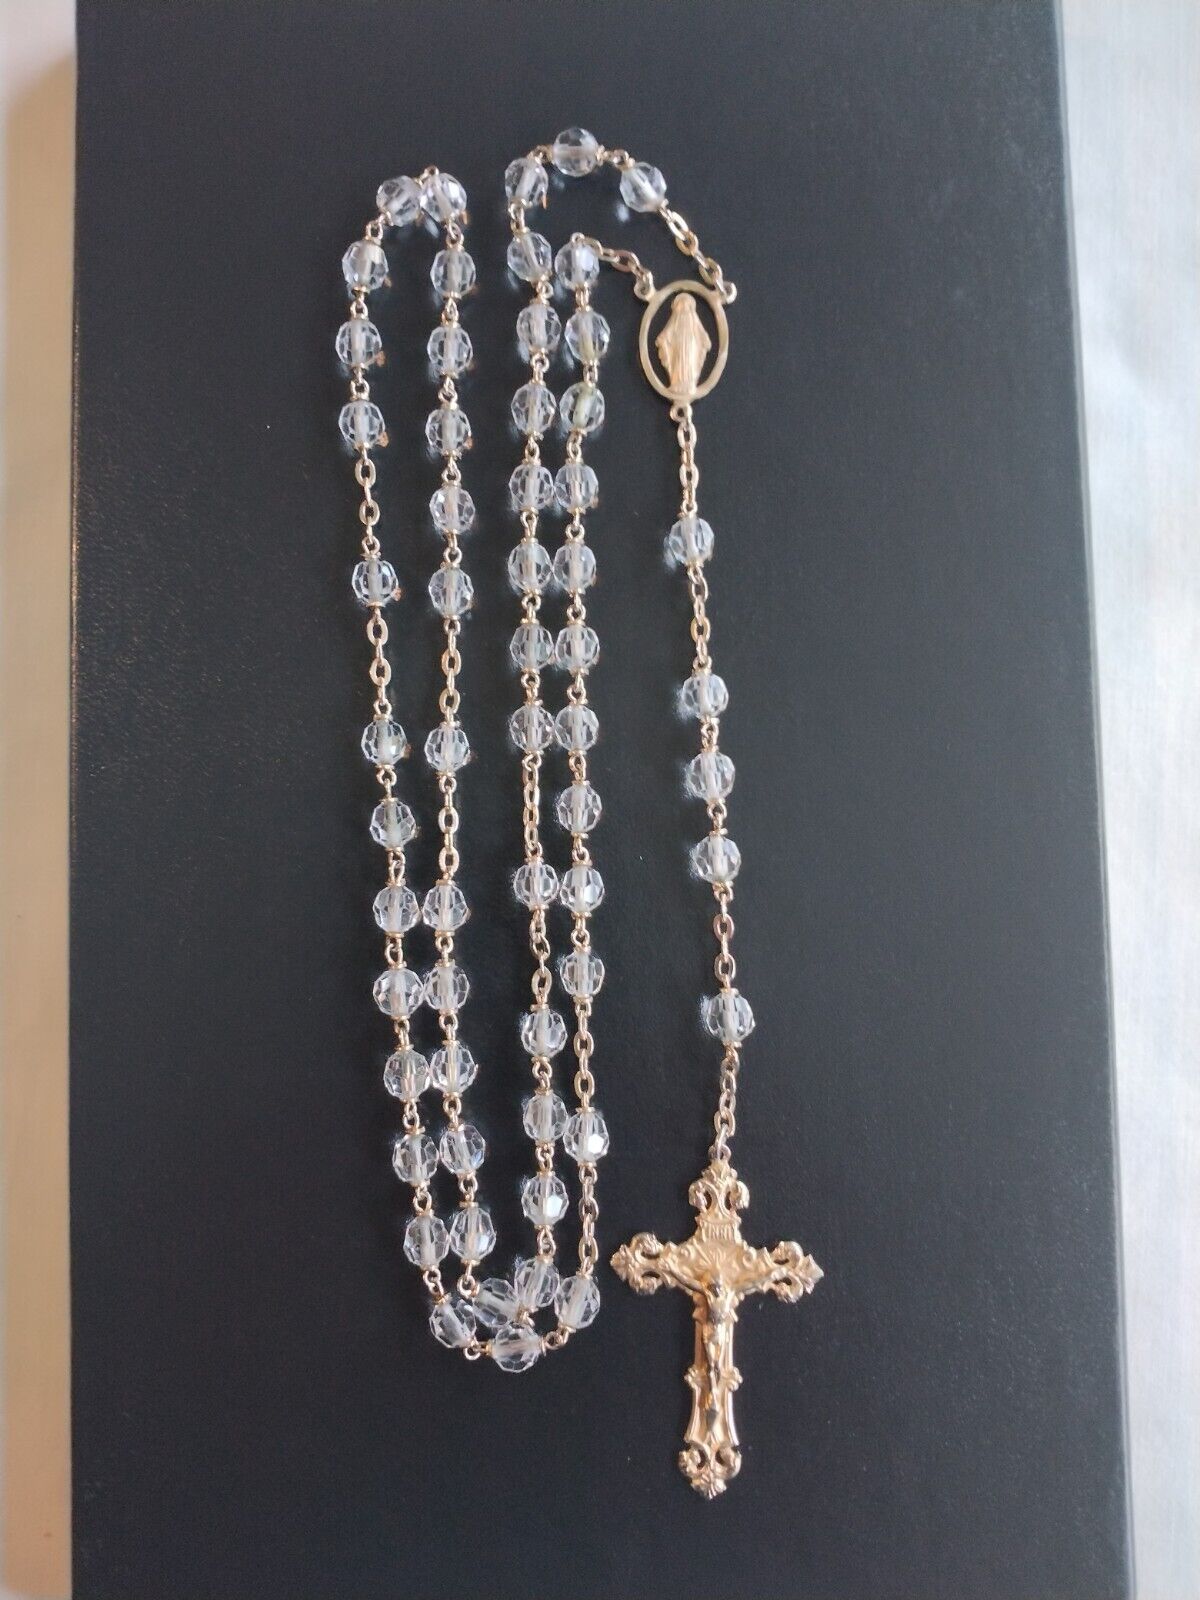 Vintage Chapel Silver Filled Rock Crystal Beads Crucifix Cross Rosary Necklace